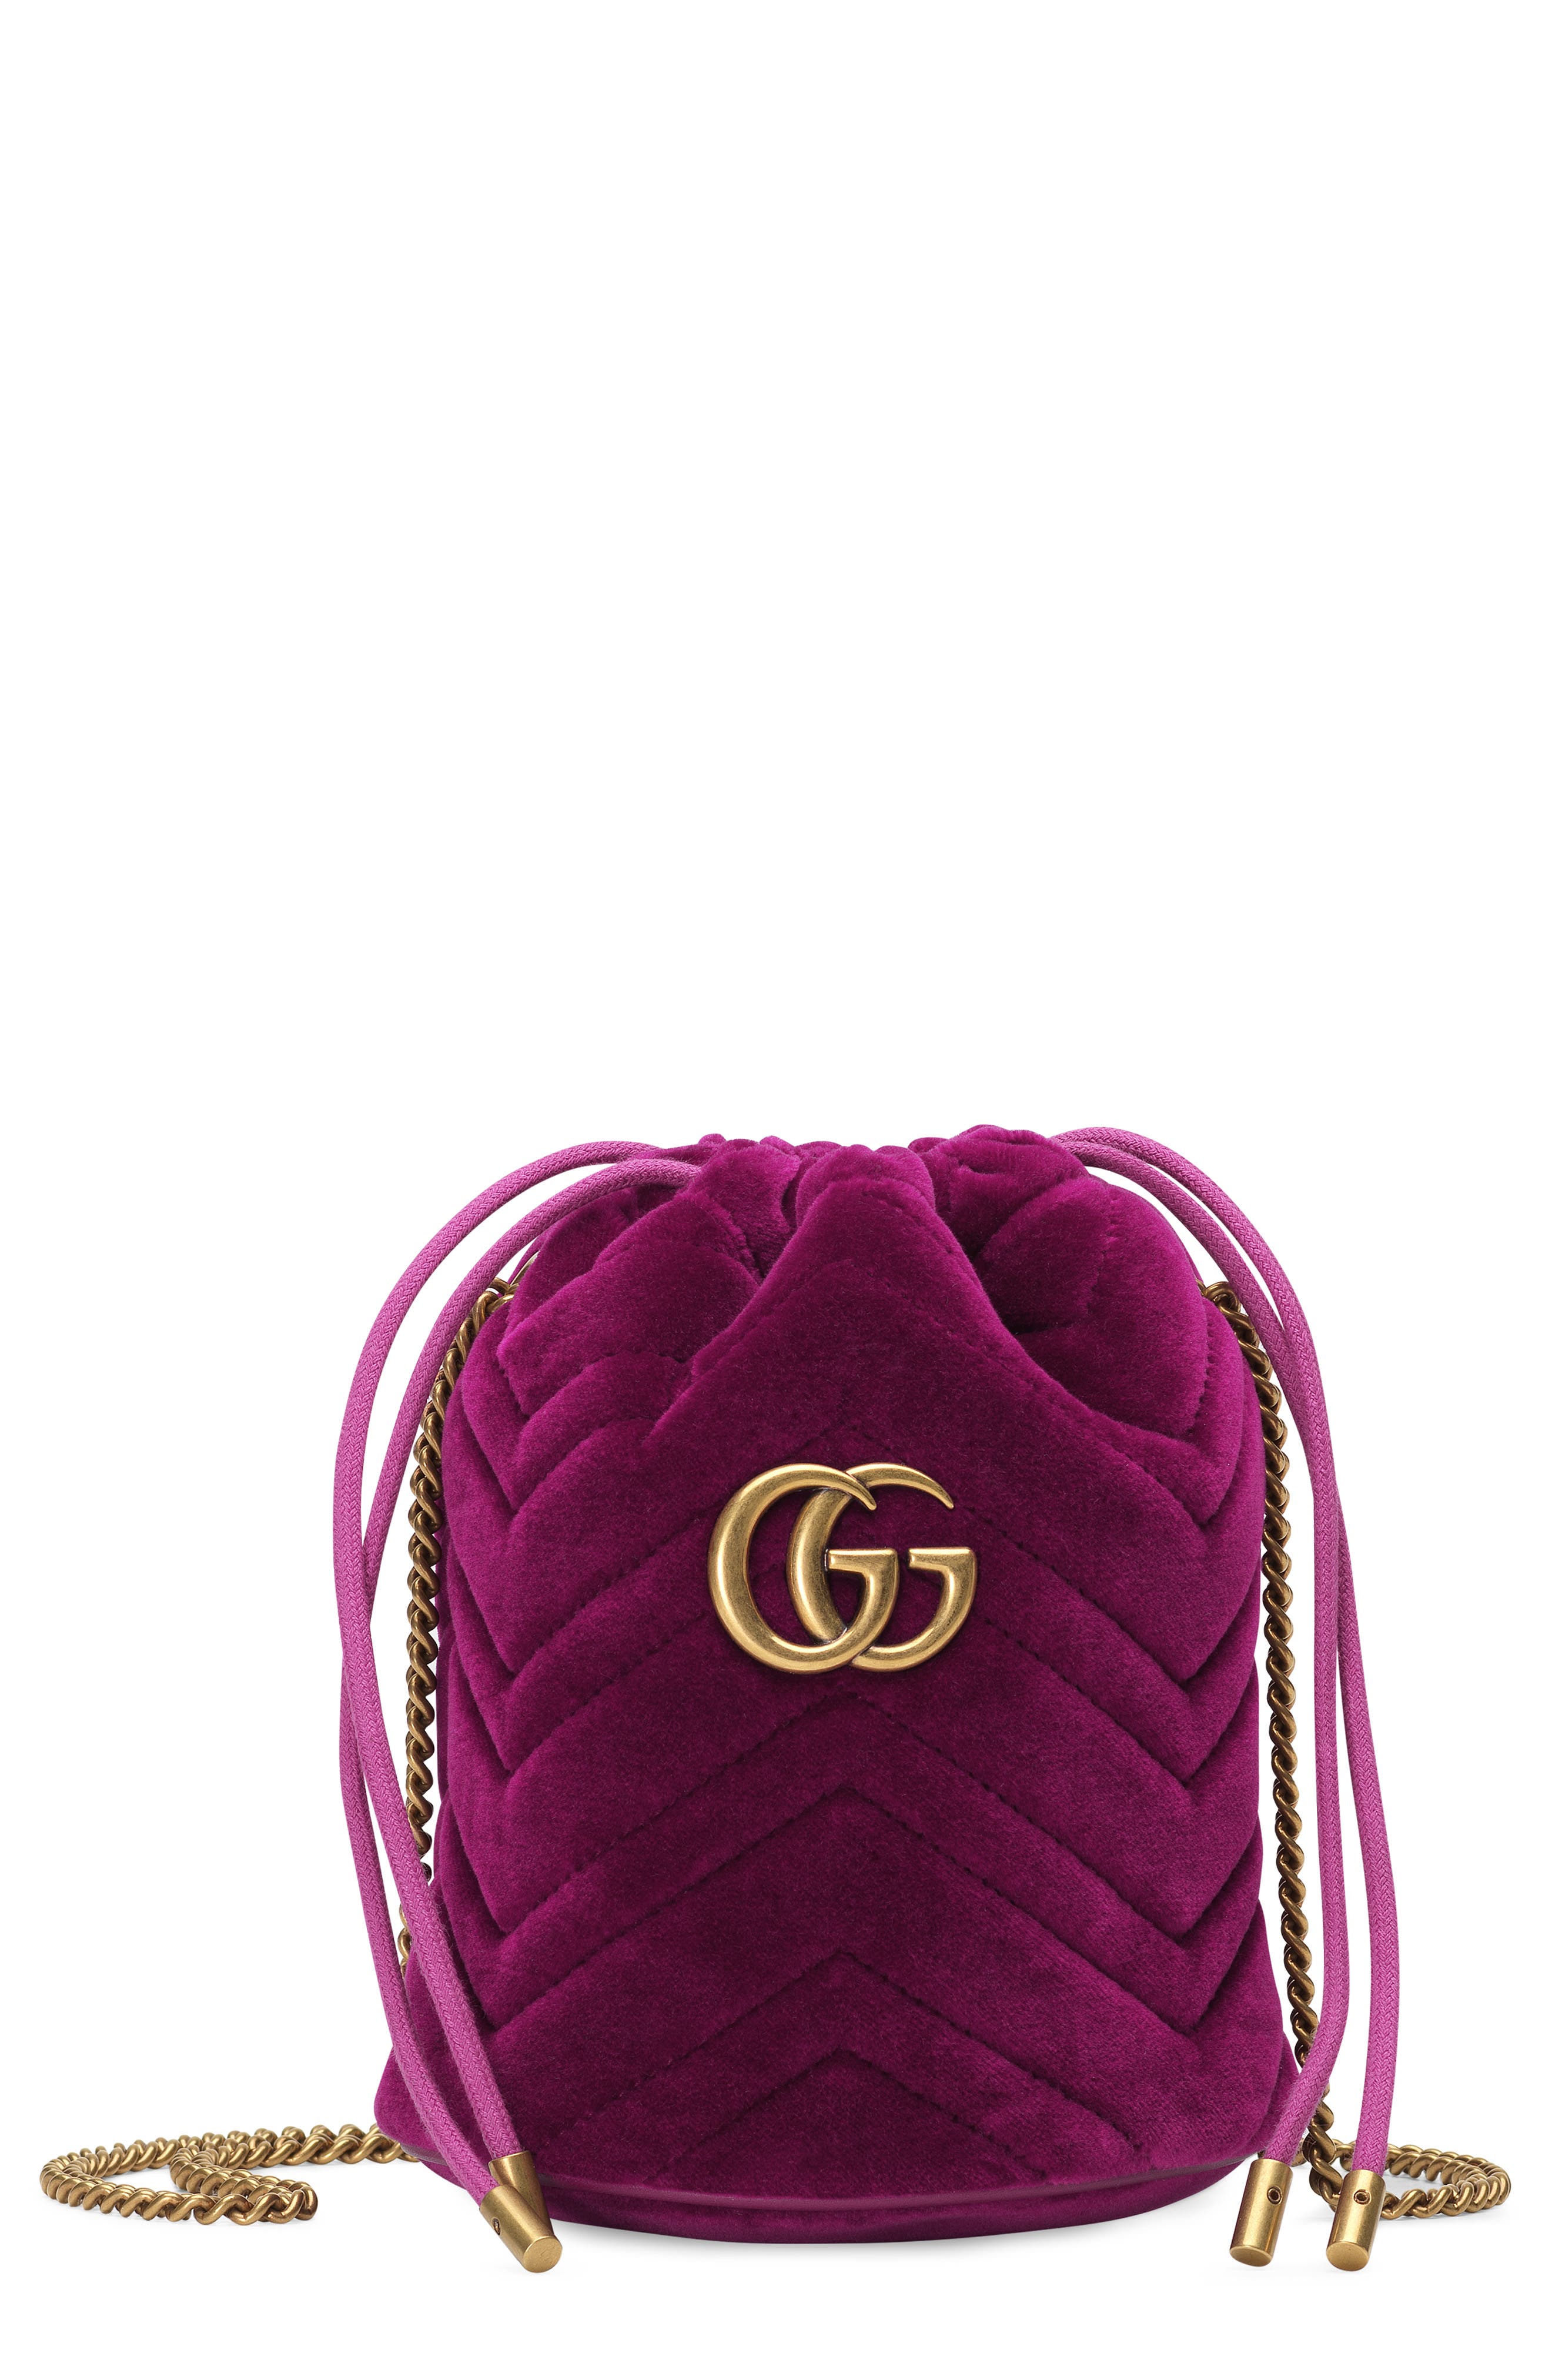 Gucci Mini Quilted Velvet Bucket Bag 